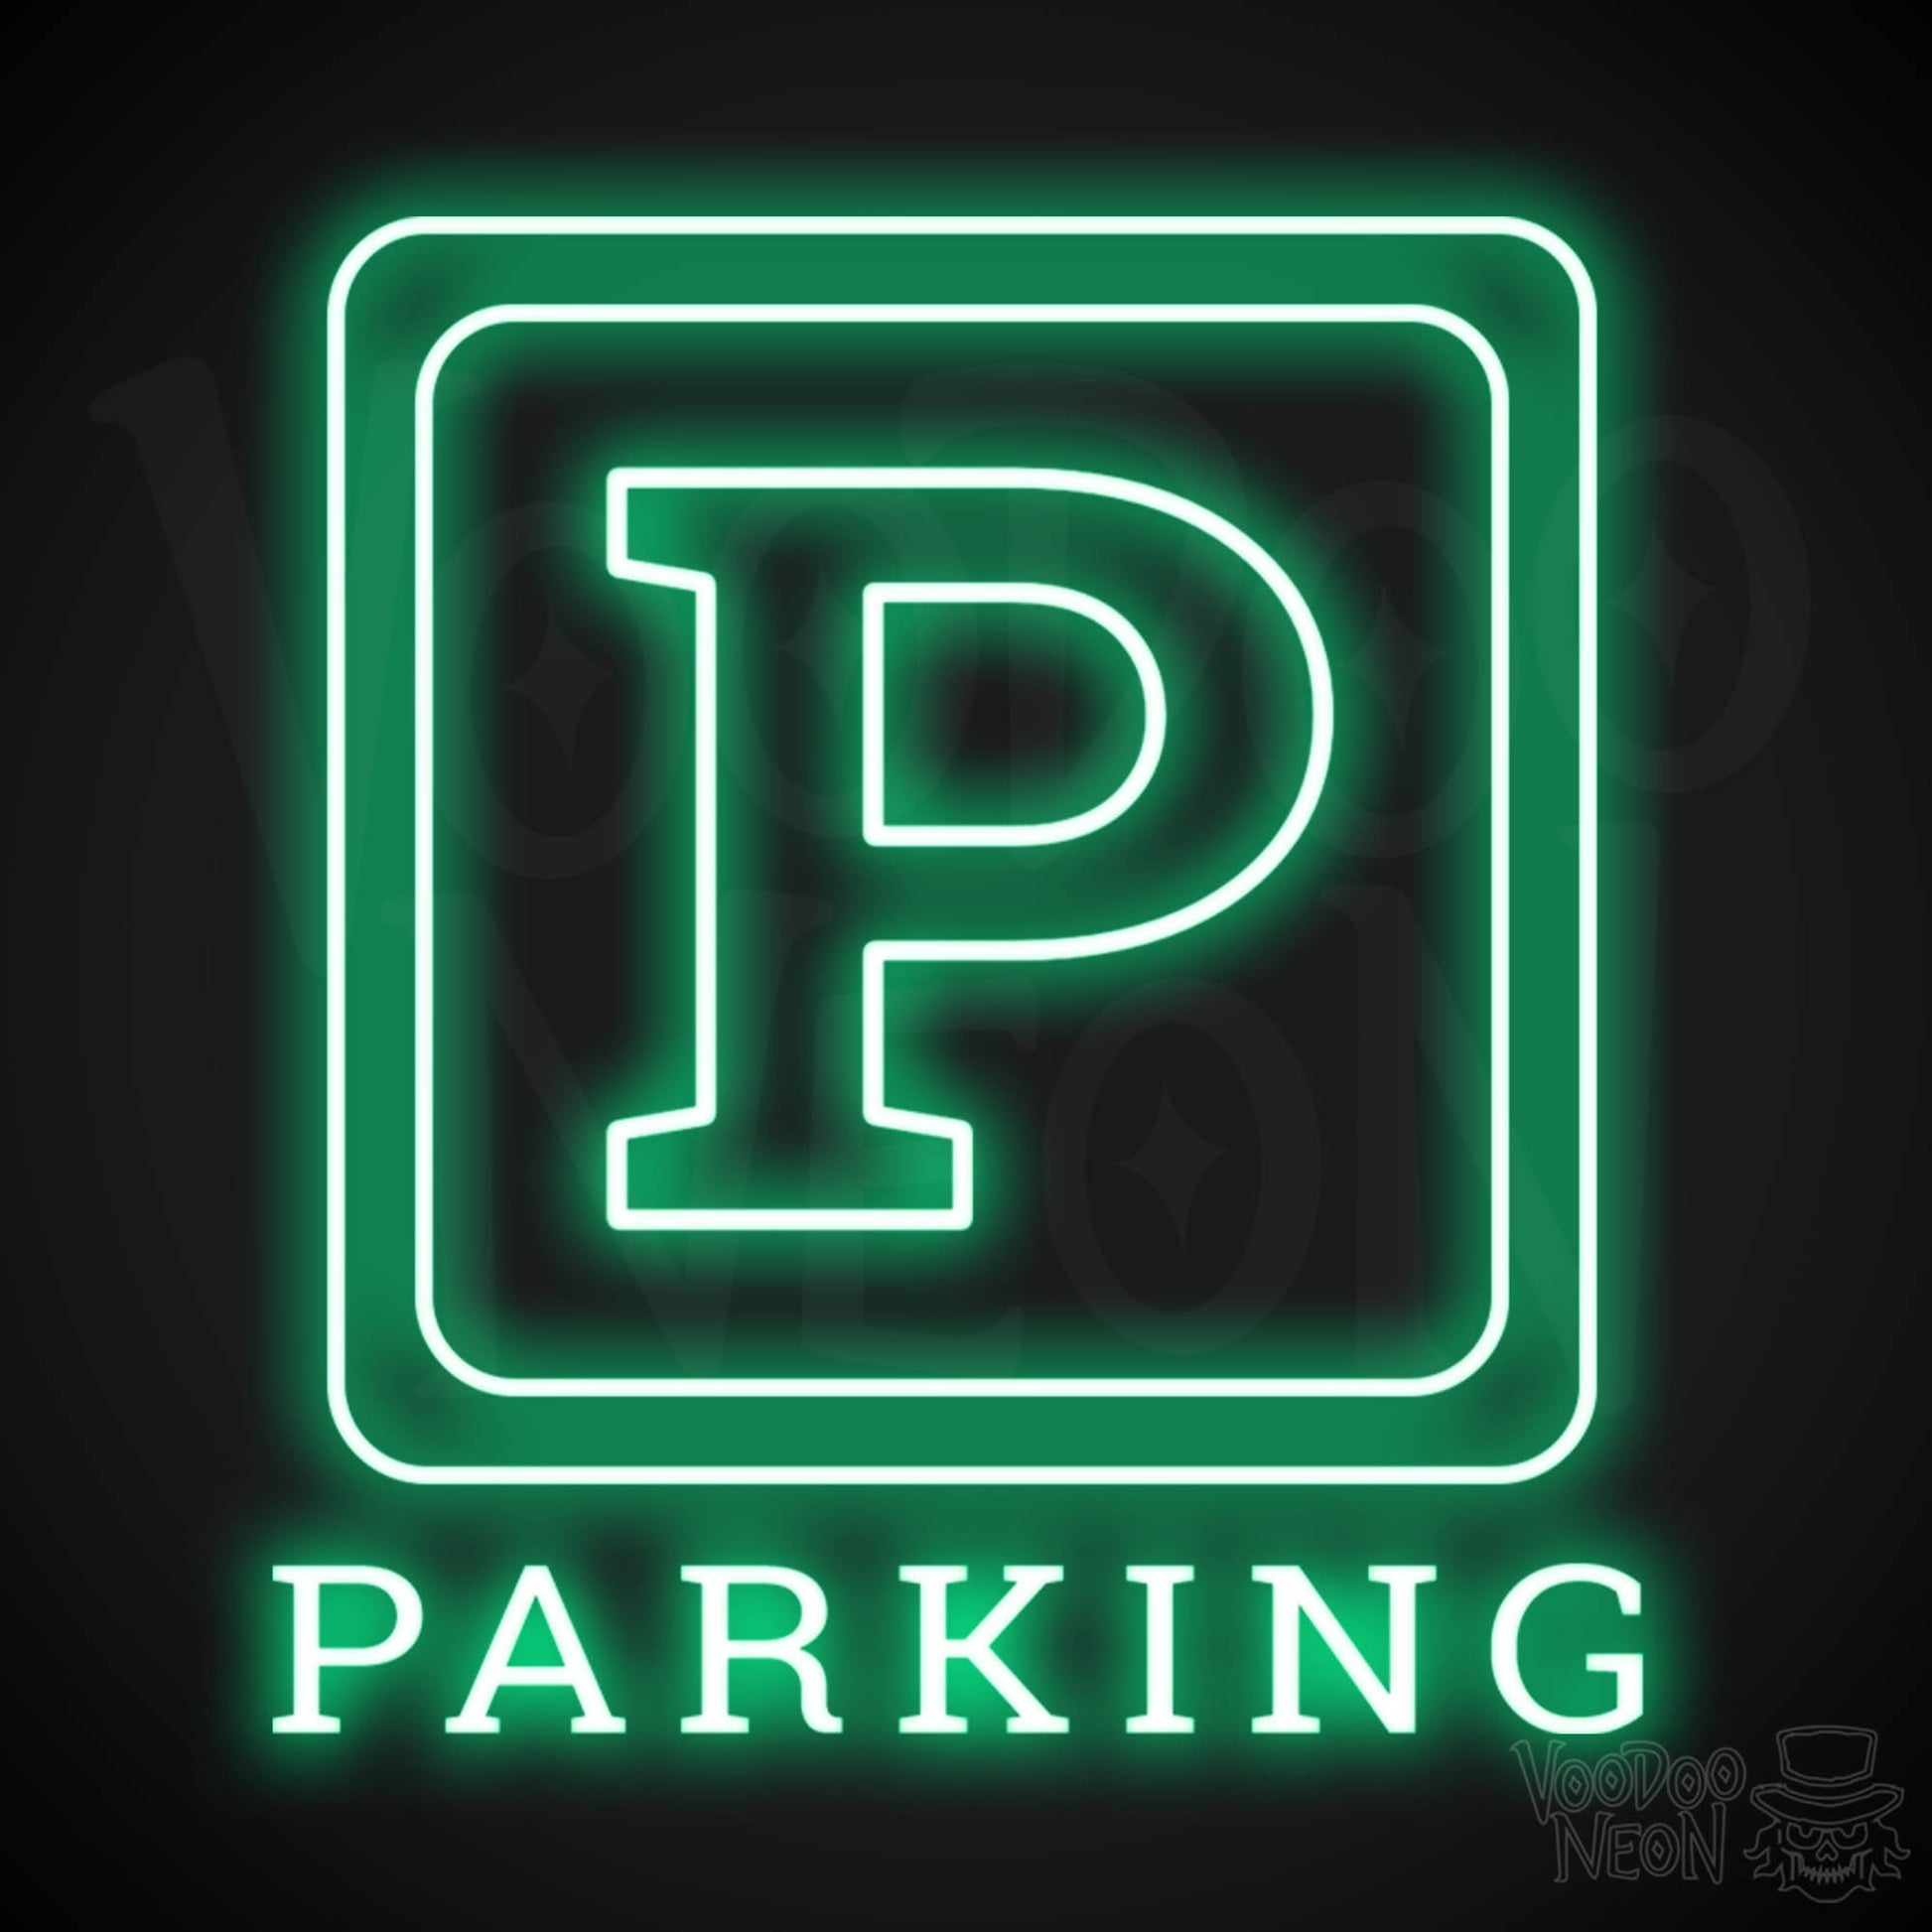 Parking LED Neon - Green